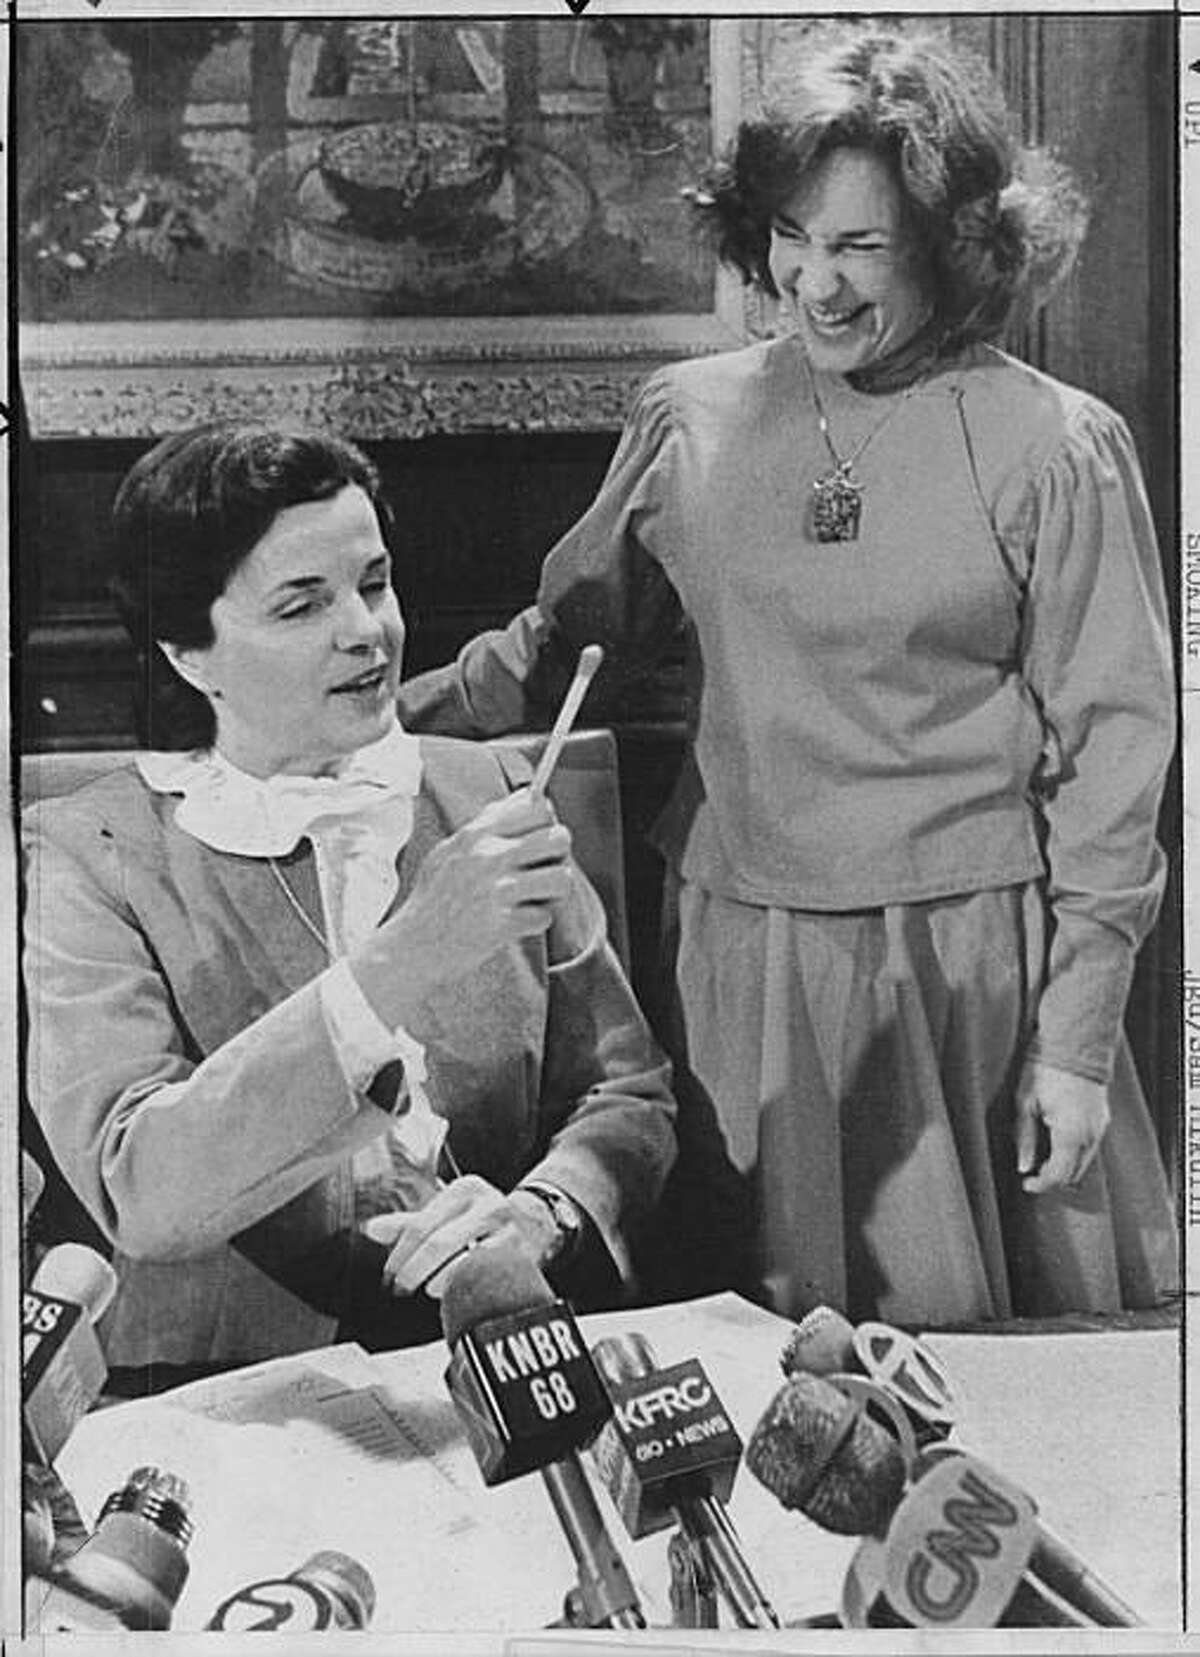 wayback01.jpg Mayor Dianne Feinstein with the pen she used to sign San Francisco's anti-smoking regulations into law in 1983; with her is Supervisor Wendy Nelder.